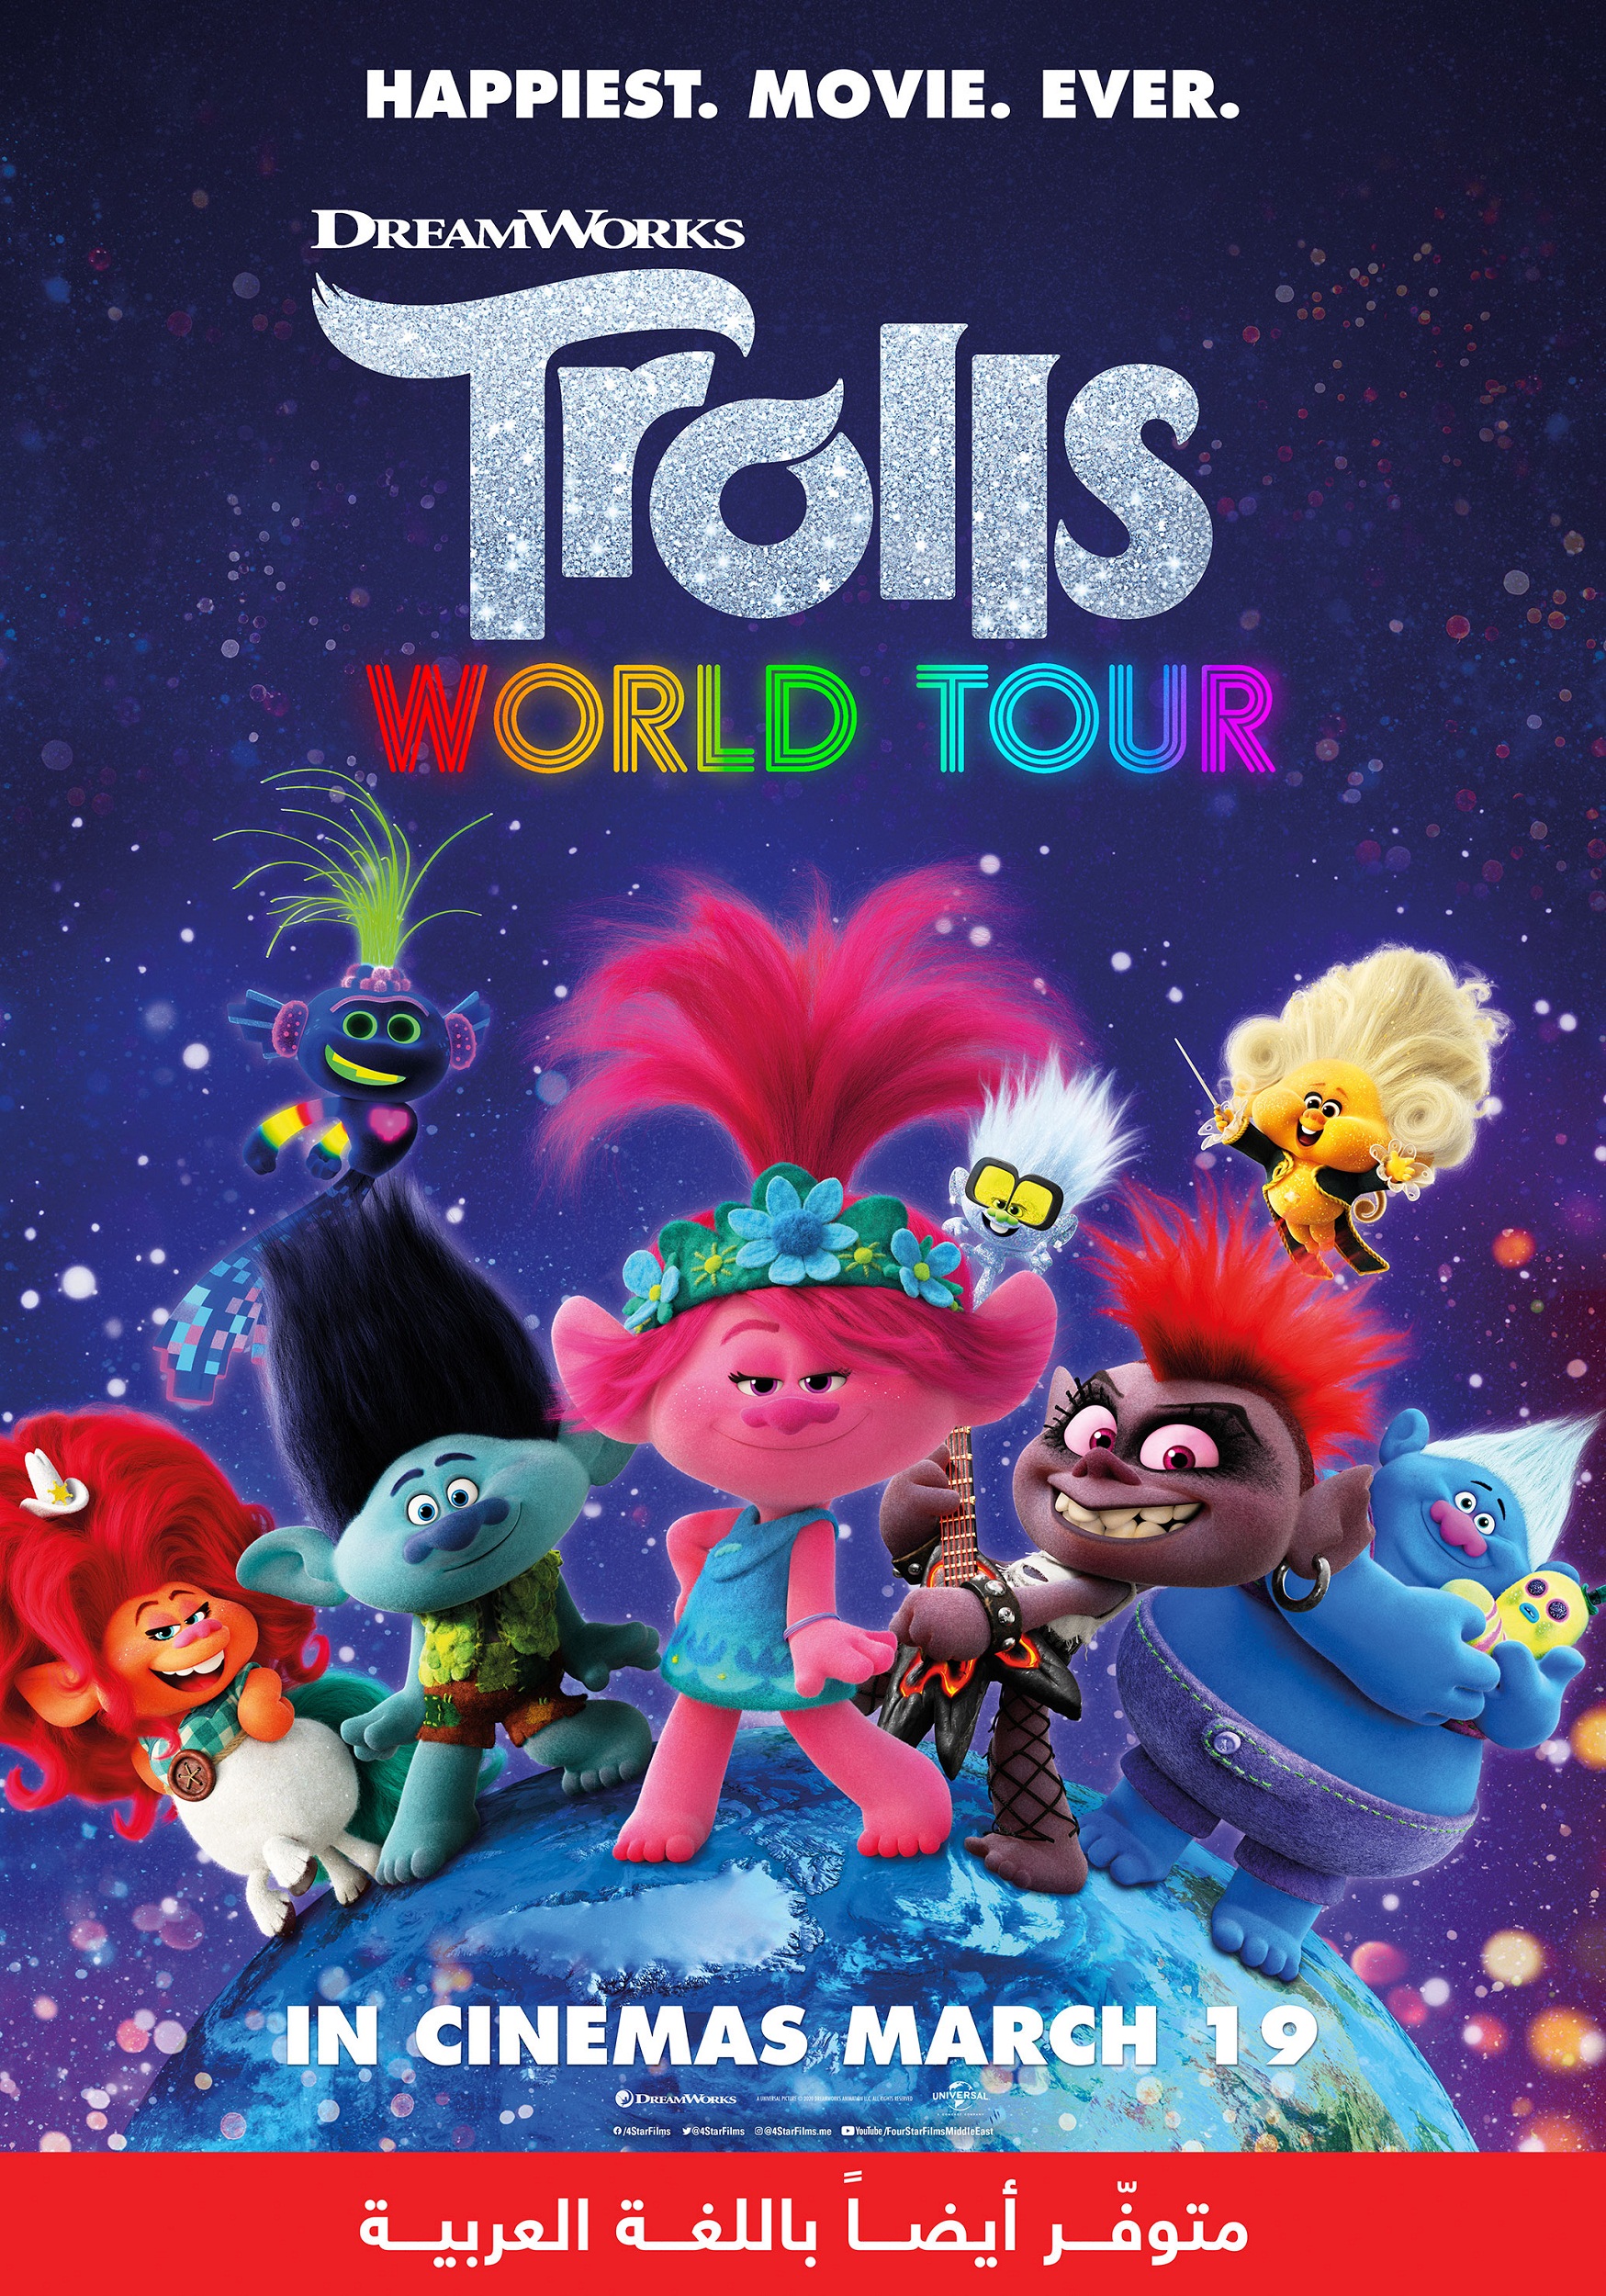 Trolls World Tour, reviewed by a 4.5-year-old and Vox's critic-at